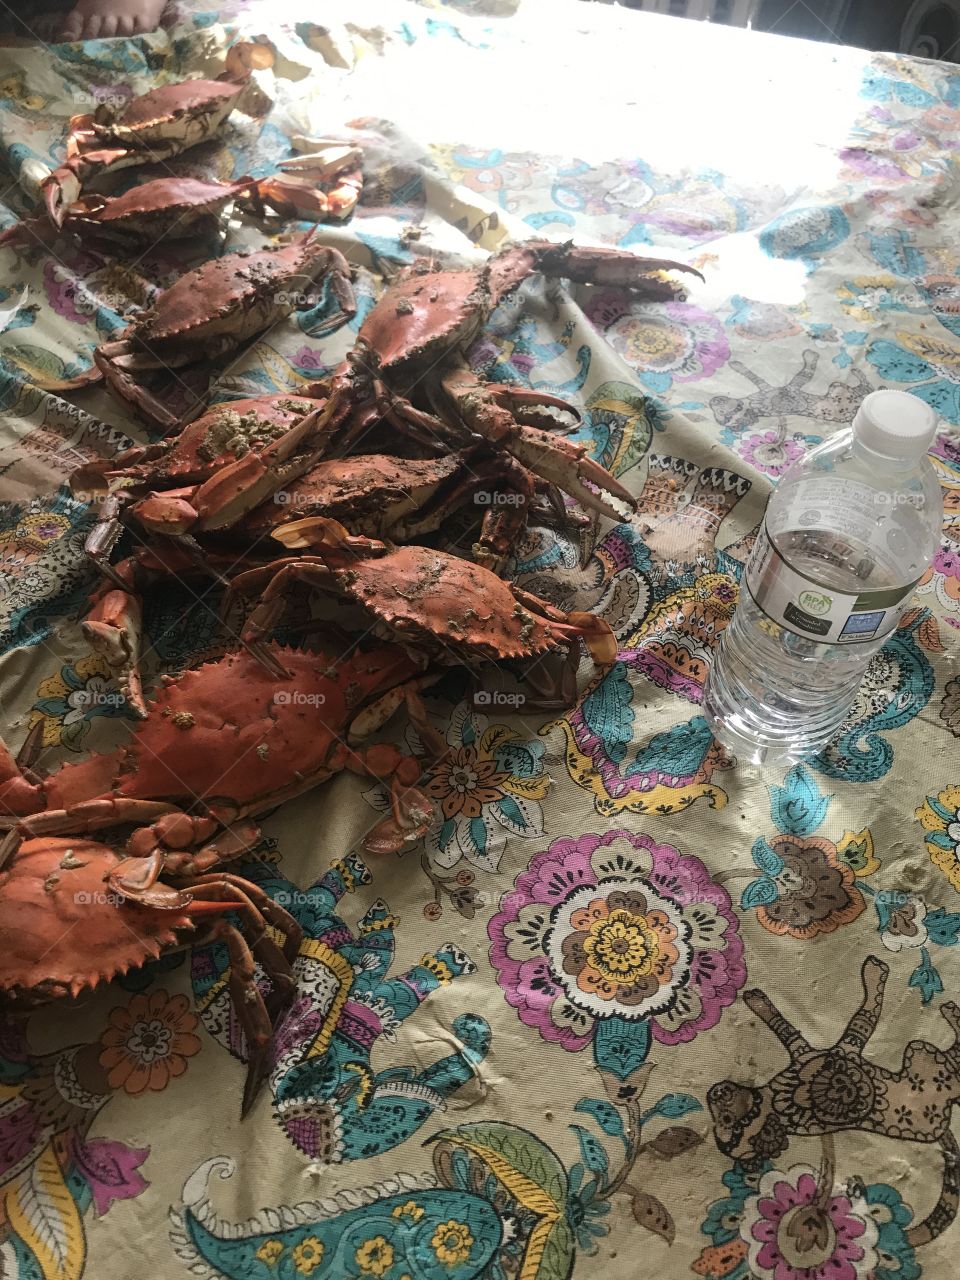 Maryland steamed crabs 